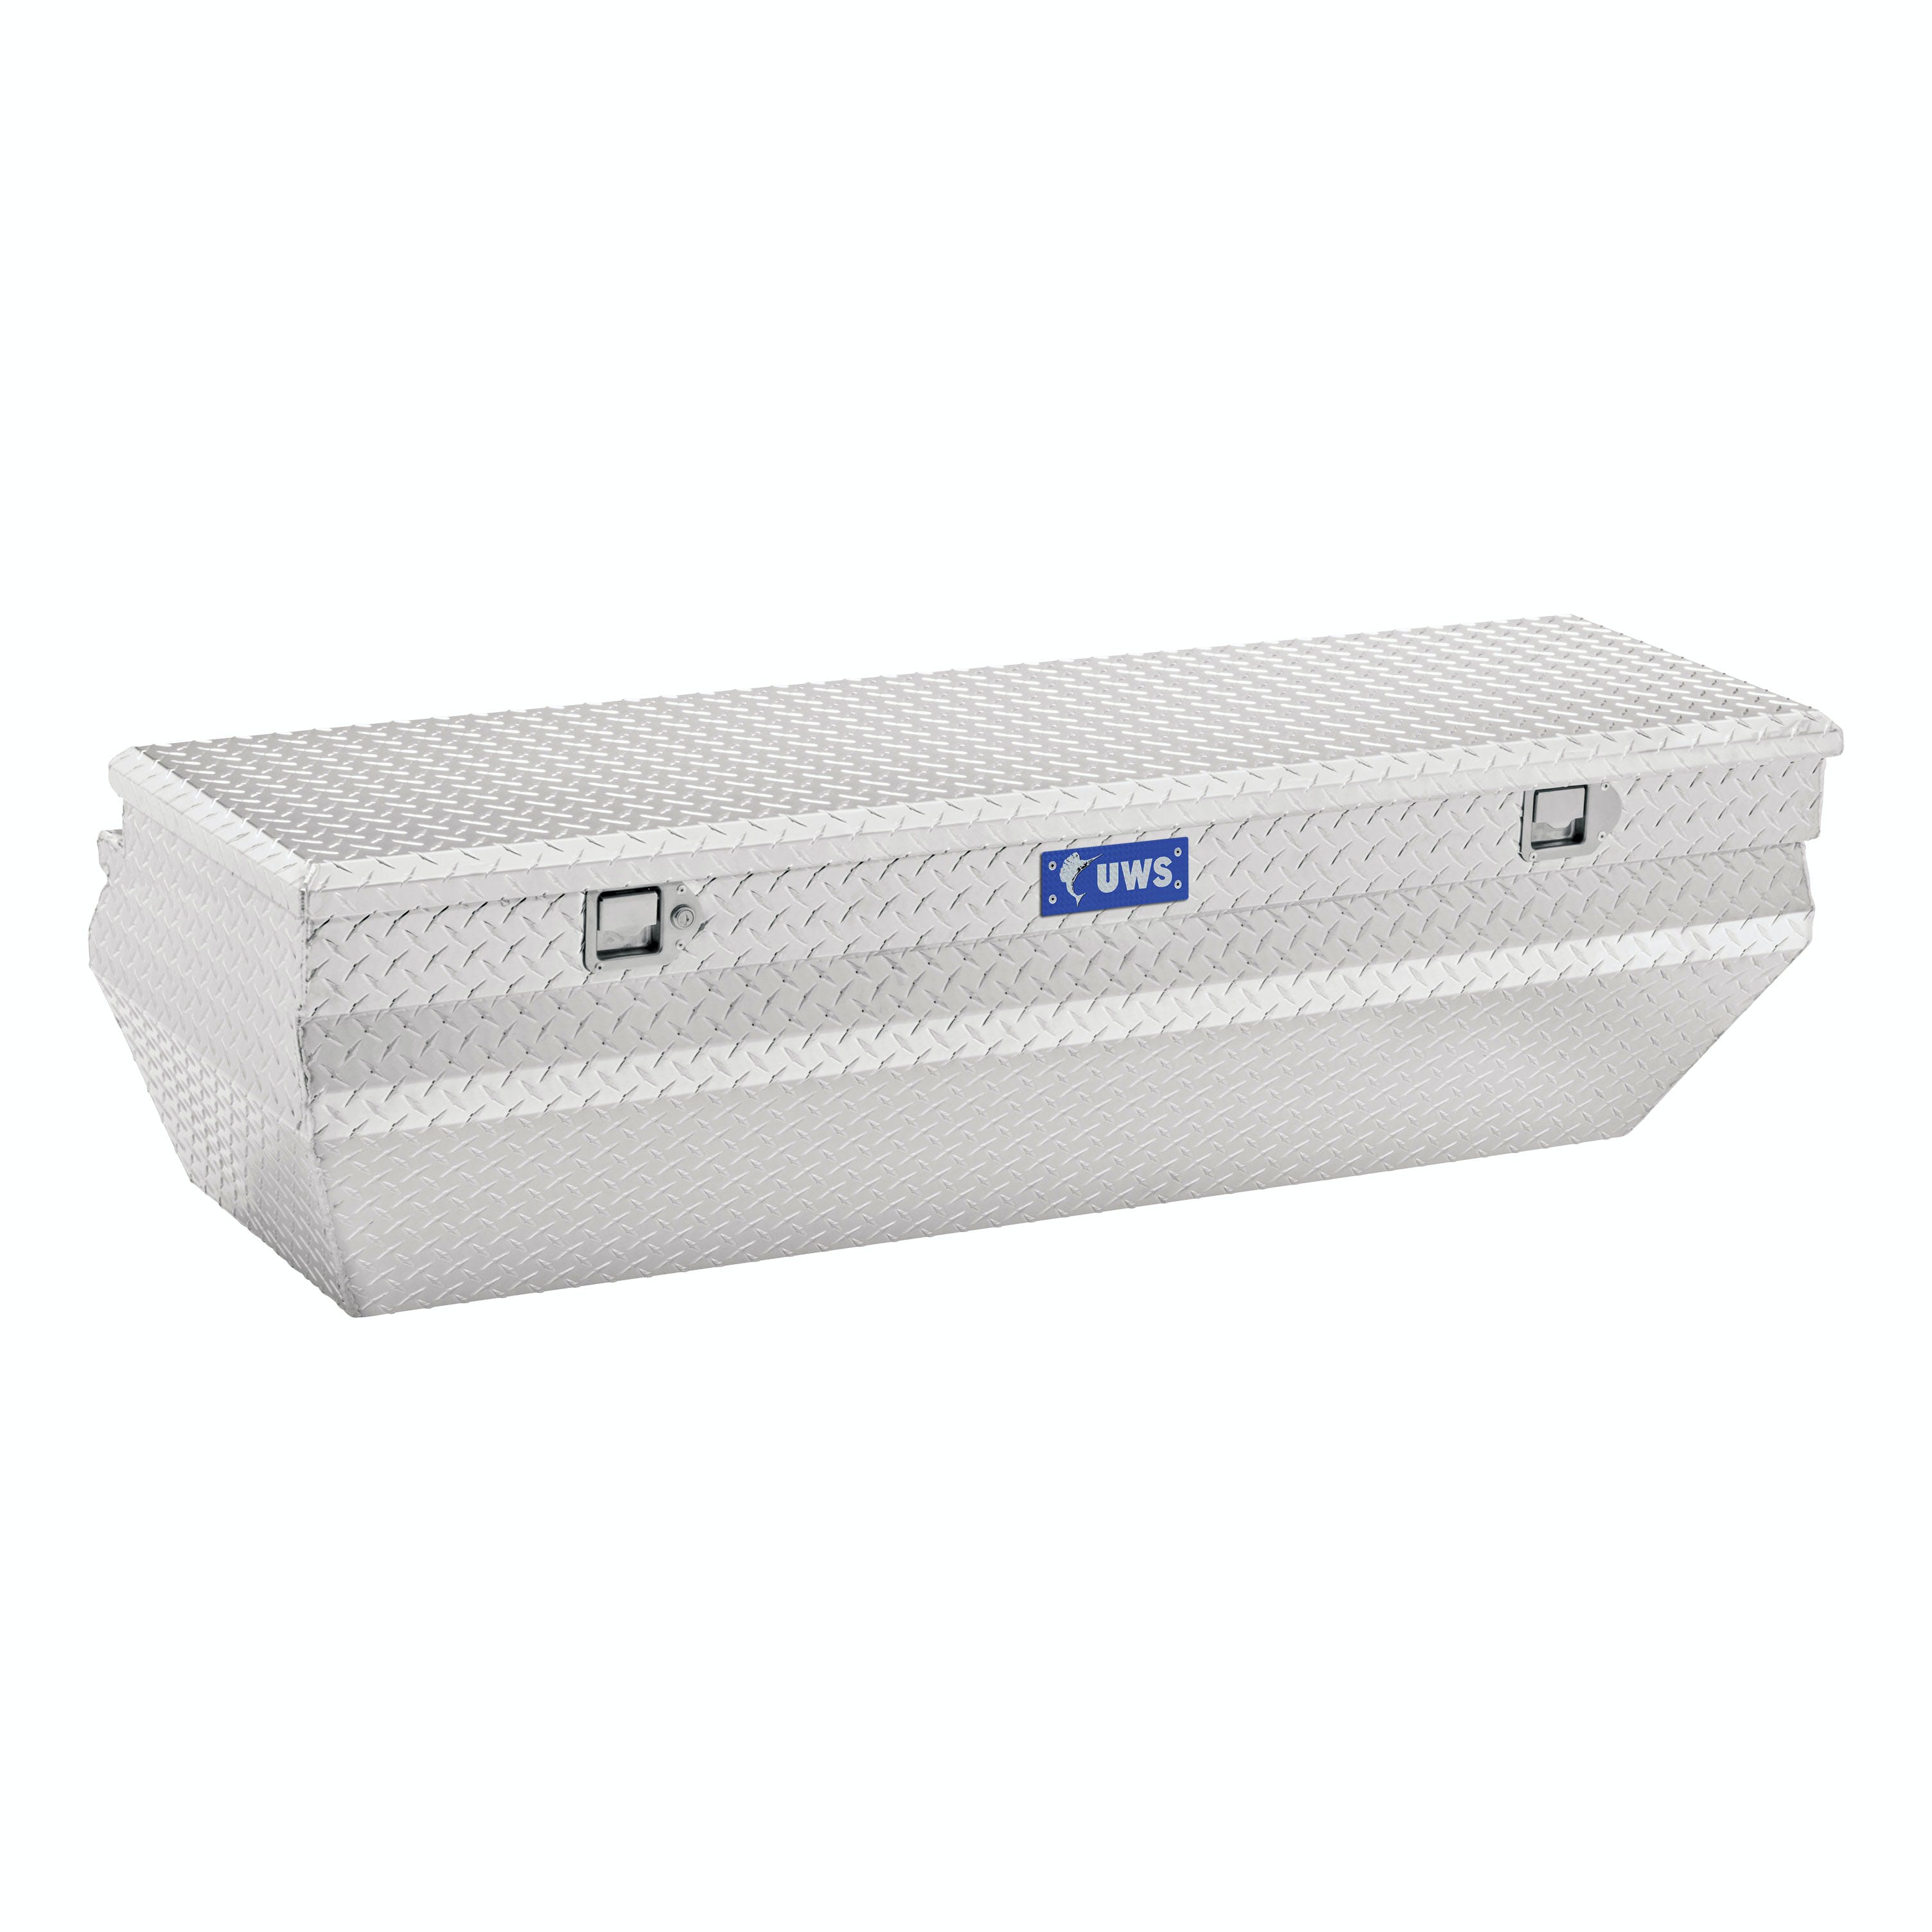 UWS TBC-55-WN 55 inch Aluminum Chest Box Wedge Notched